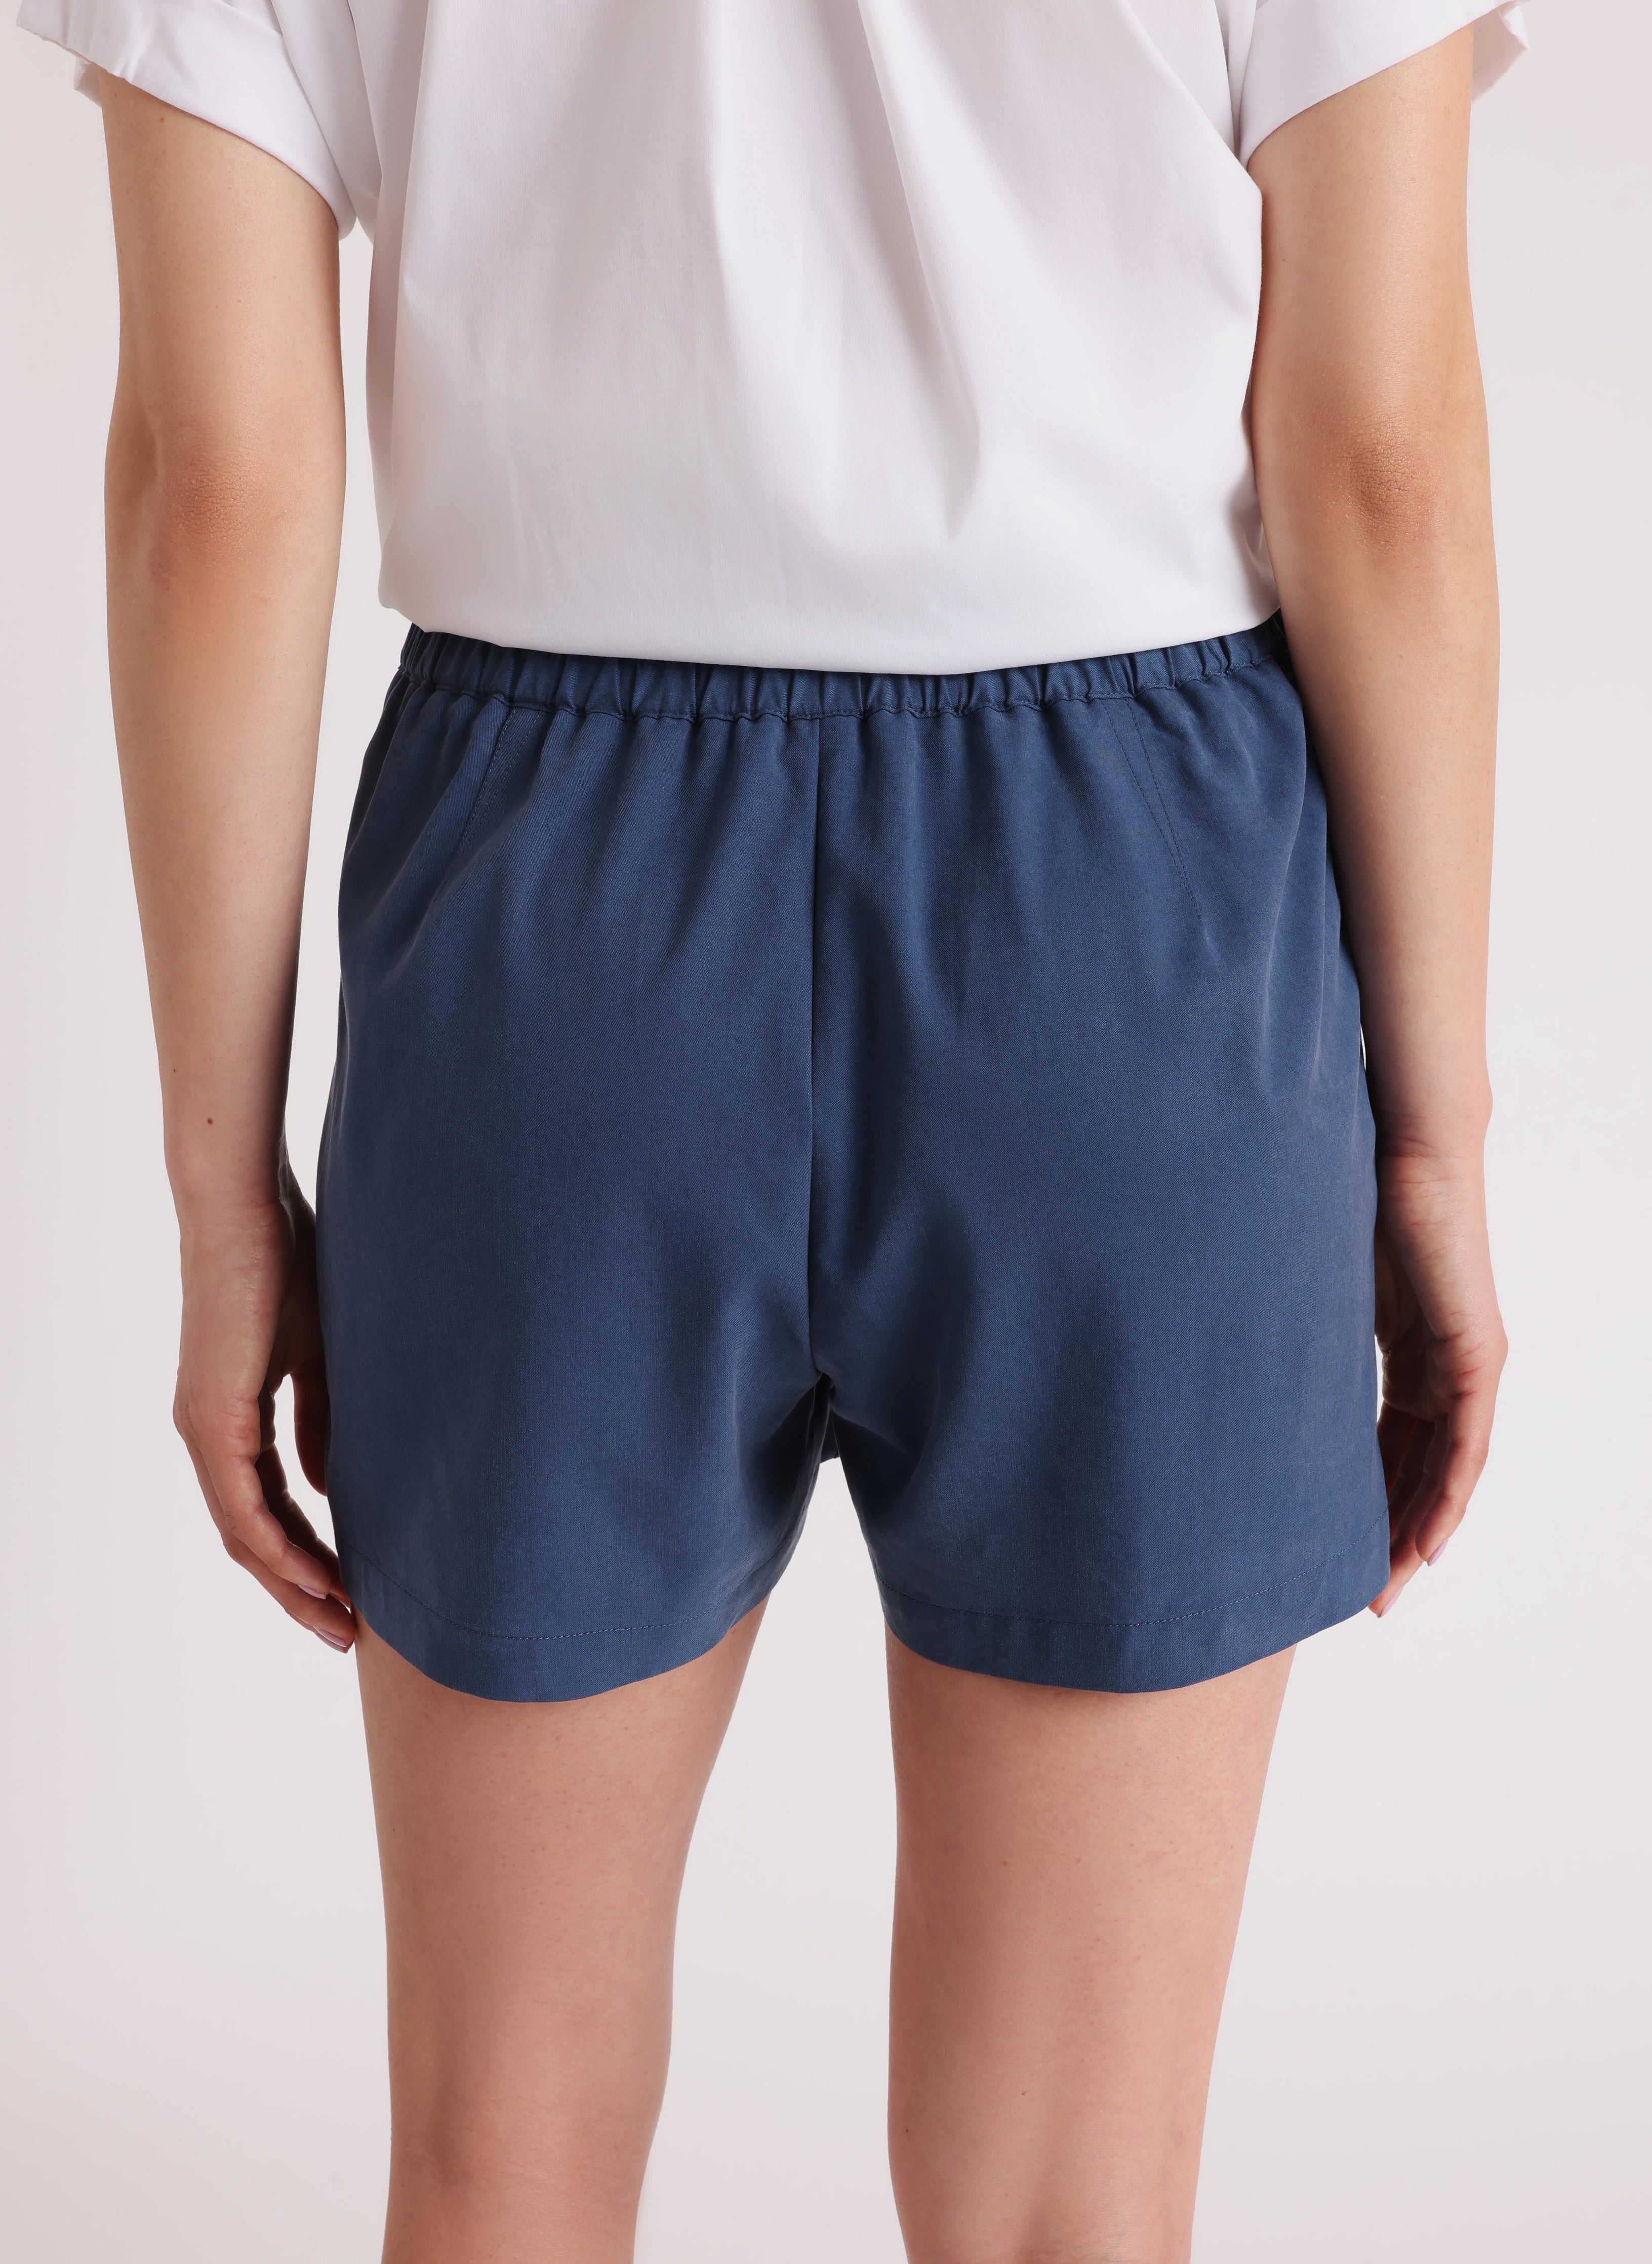 Kit and Ace — Sublime Pull On Shorts